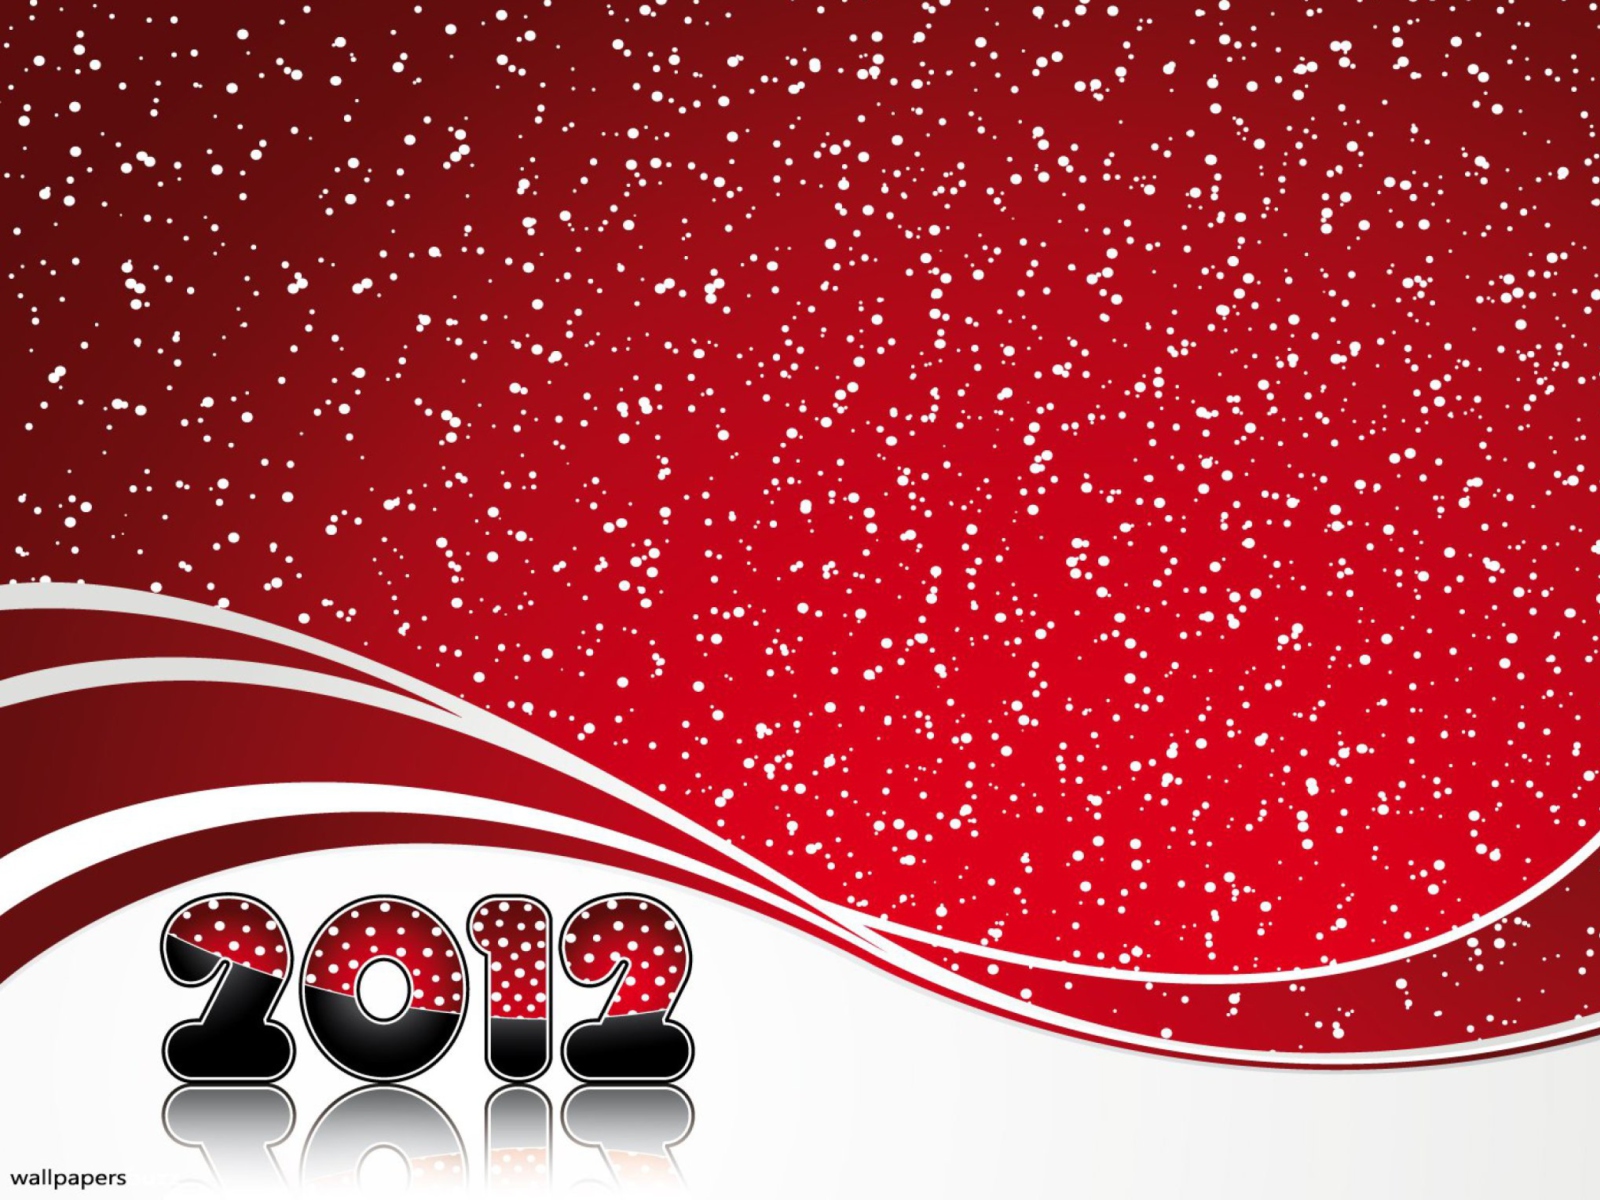 Red Snow New Year wallpaper 1600x1200